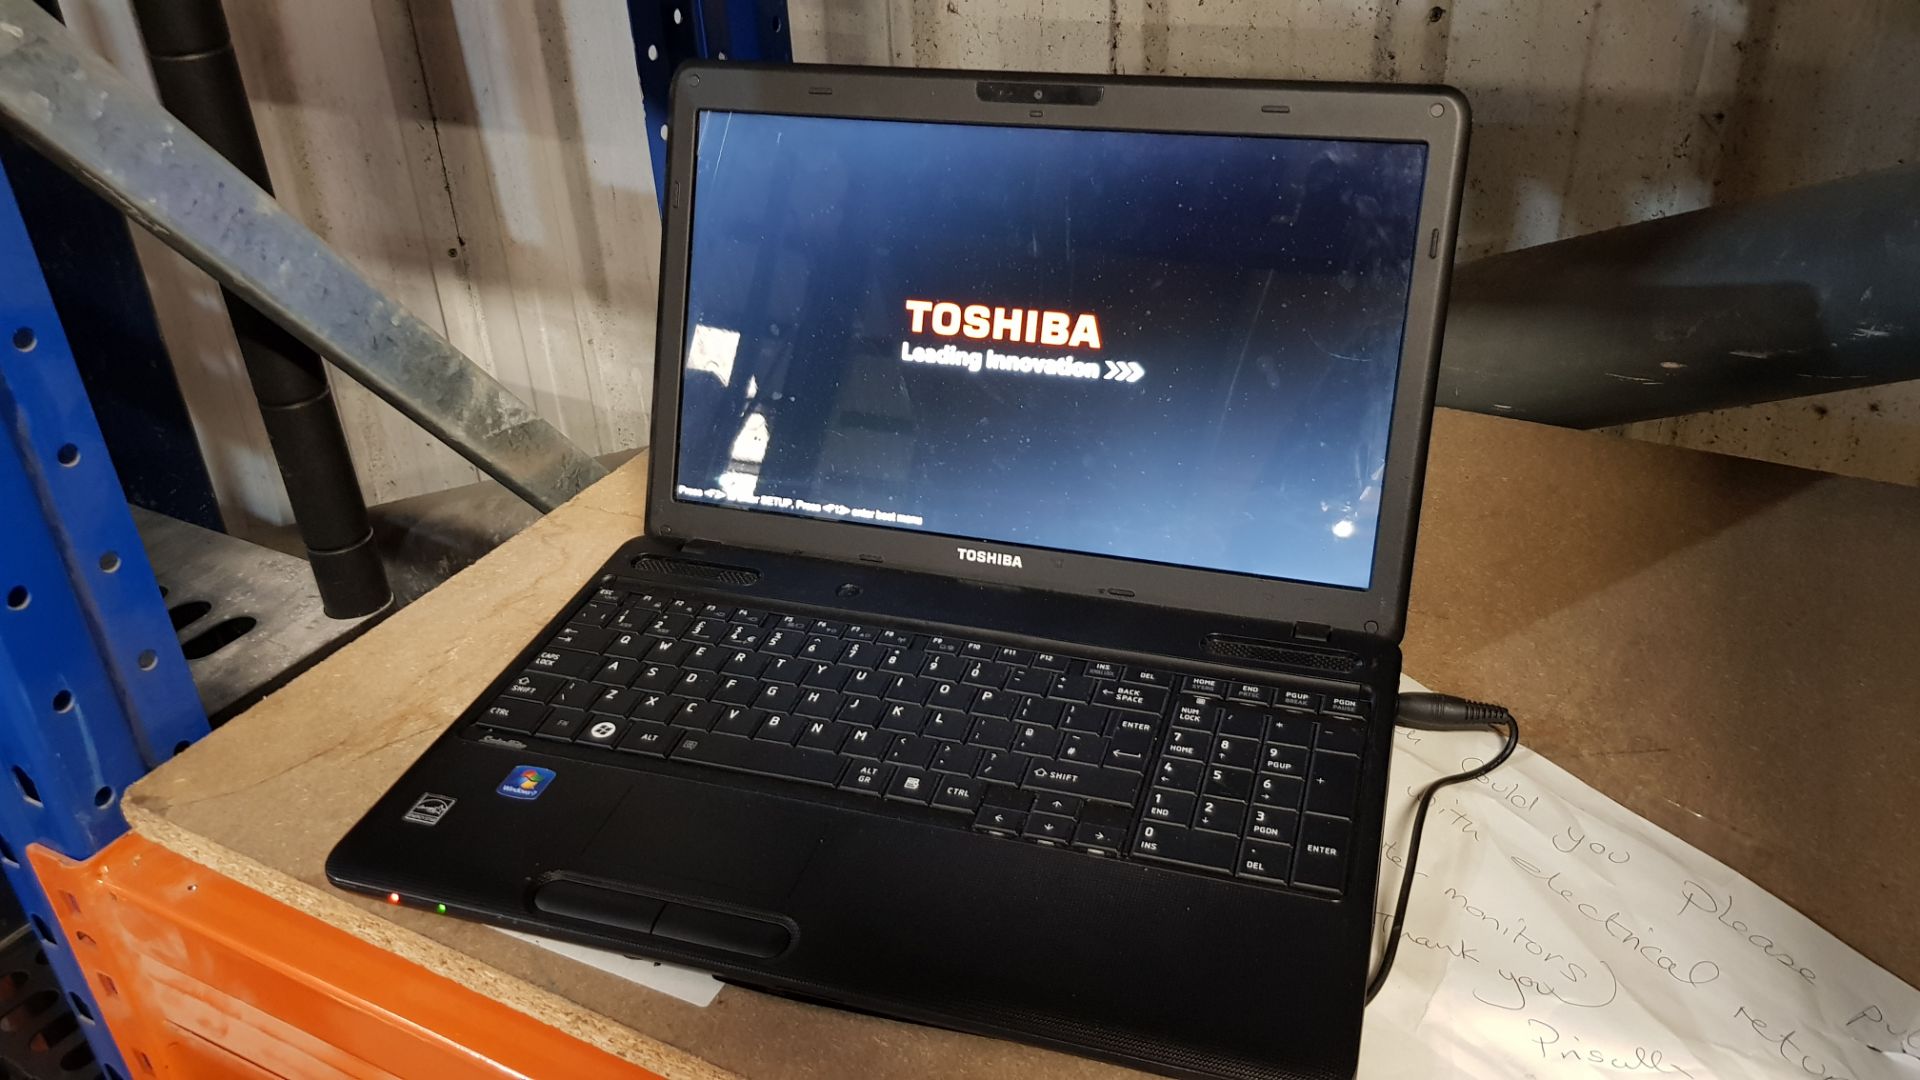 (R13B) 1 X Toshiba Satellite C660D-1C6 Laptop (With Power Lead). Item Starts And Displays “Insert B - Image 4 of 5